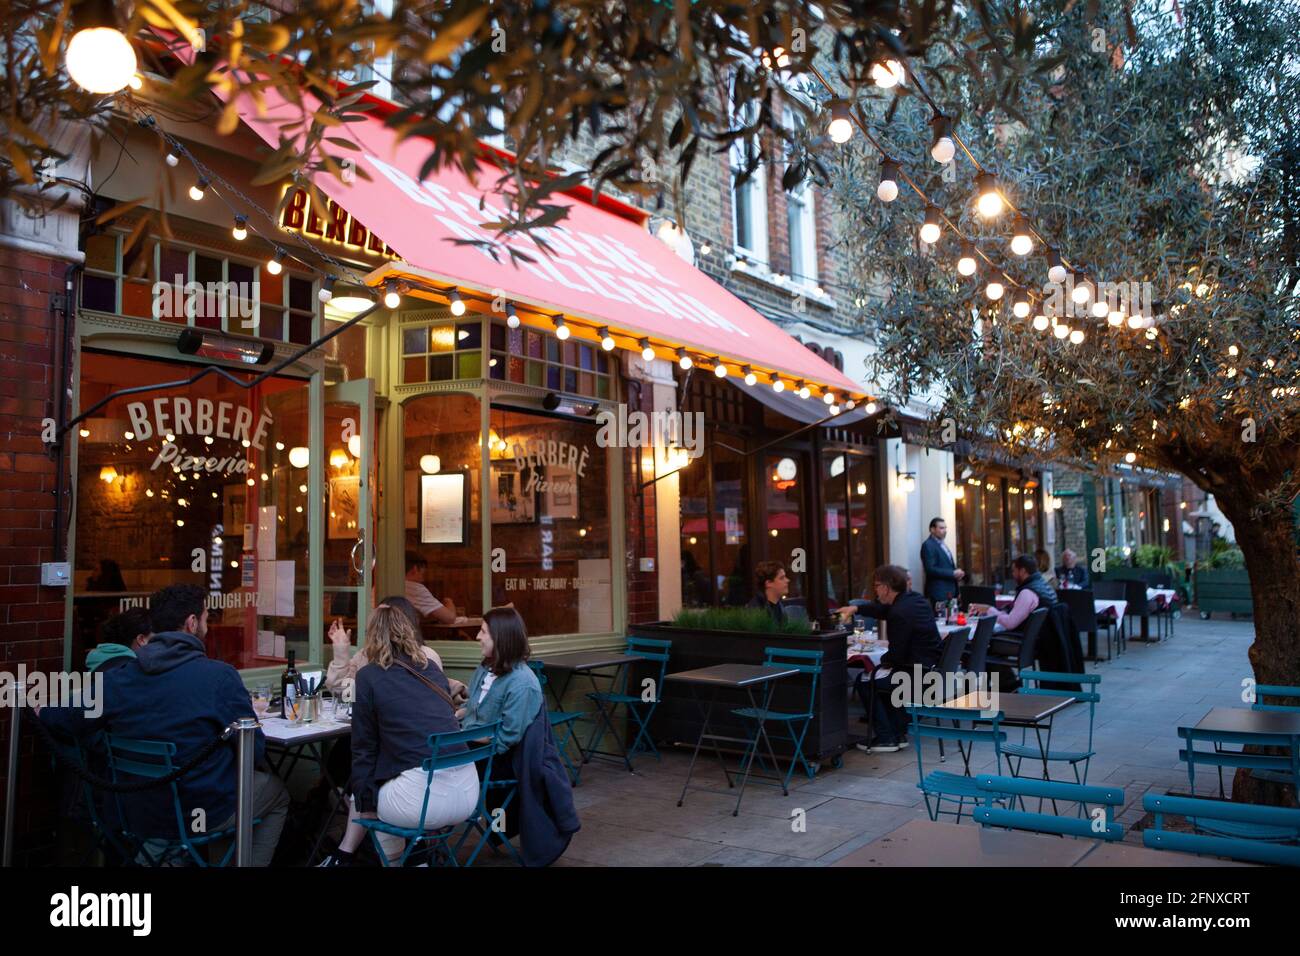 Clapham, London, 19 May 2021: Despite Stage 3 regulations allowing indoor dining, when the weather permits it diners often prefer to remain outdoors where good ventilation reduces the risk of coronavirus transmission. Anna Watson/Alamy Live News Stock Photo